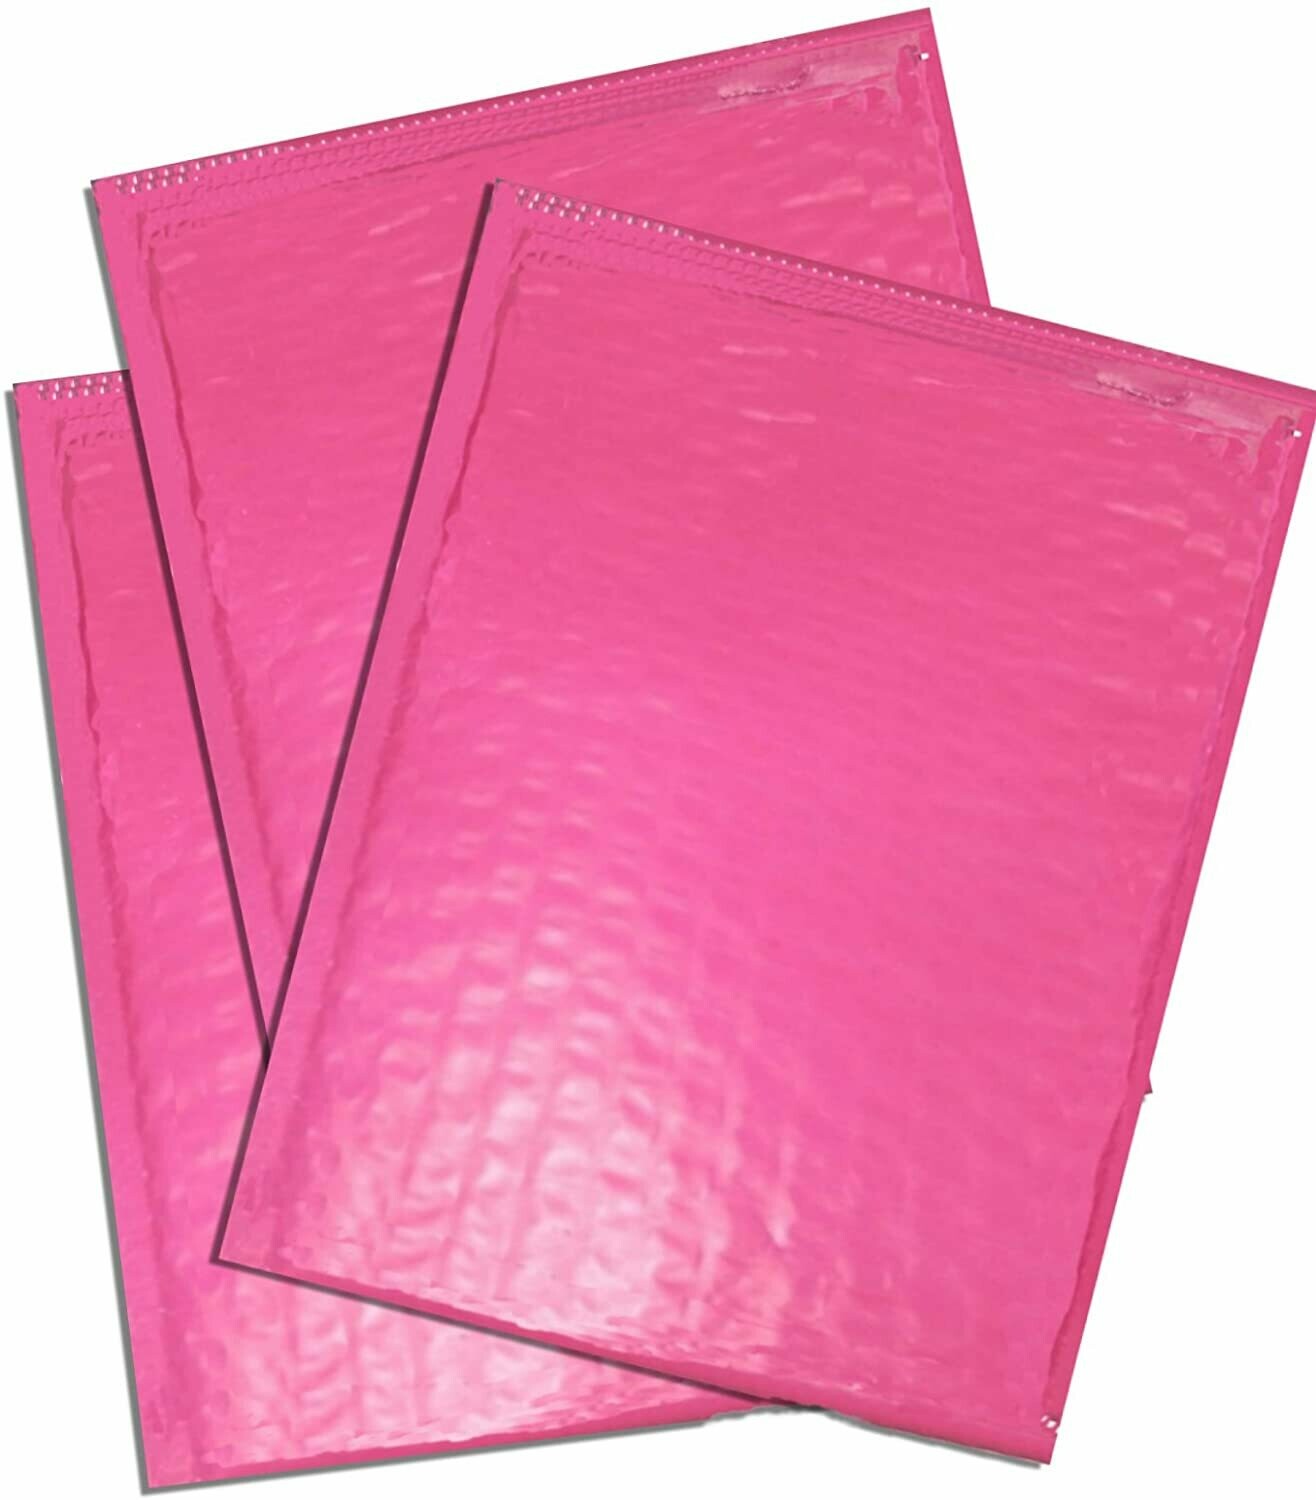 6×10 Bubble Mailers (Hot Pink), Quantity: 5